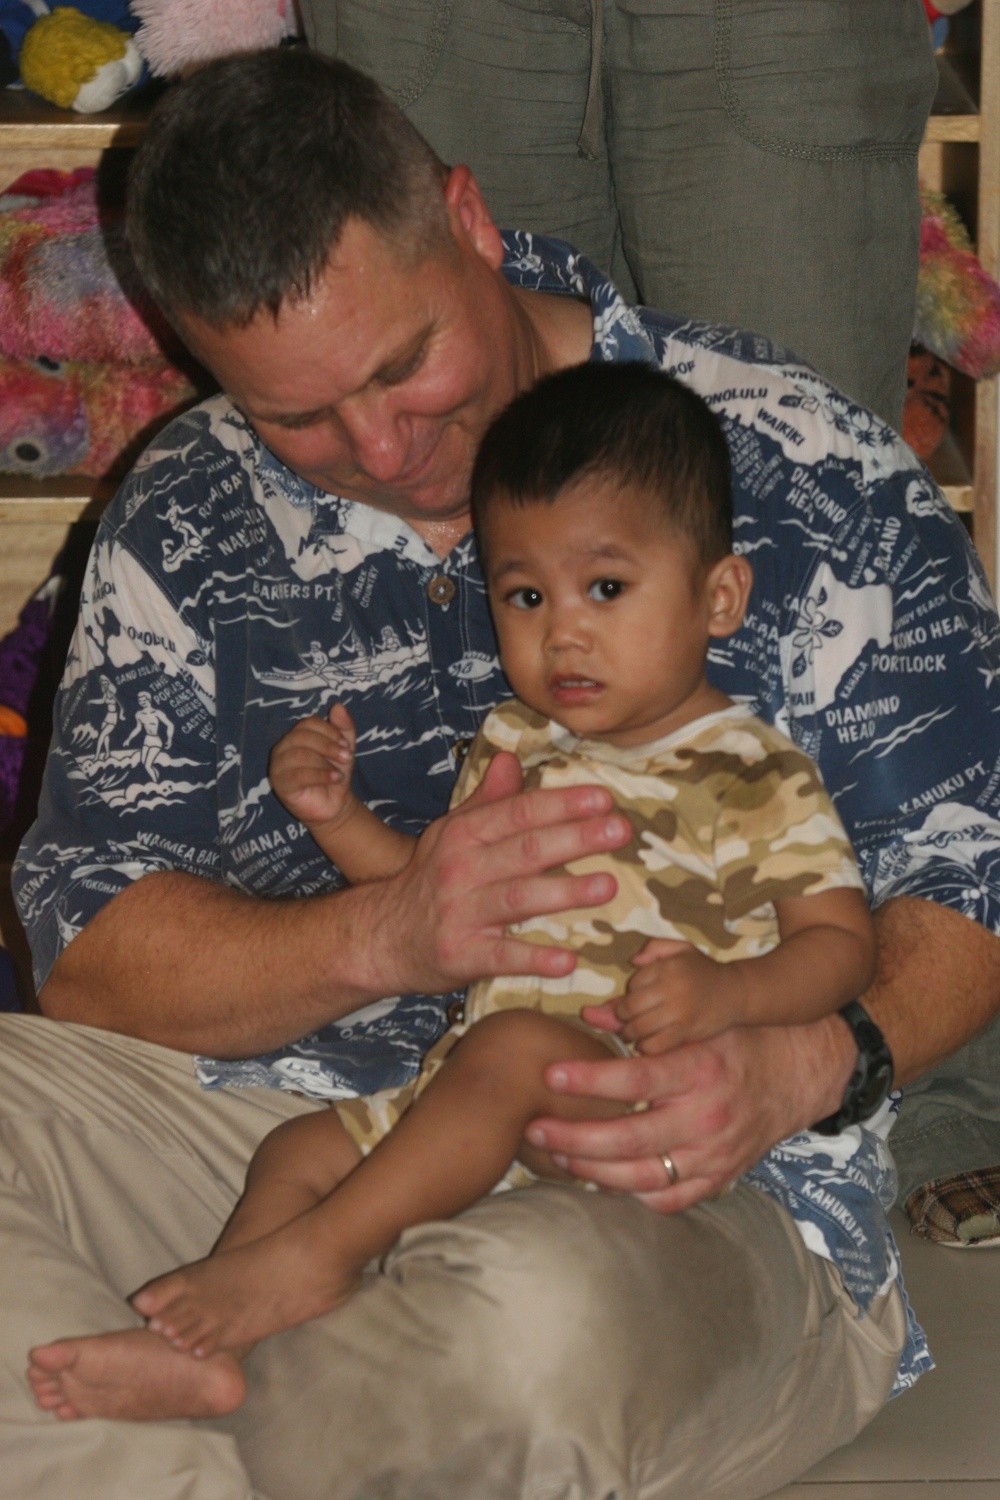 US Marines lend gentle hand to orphanage